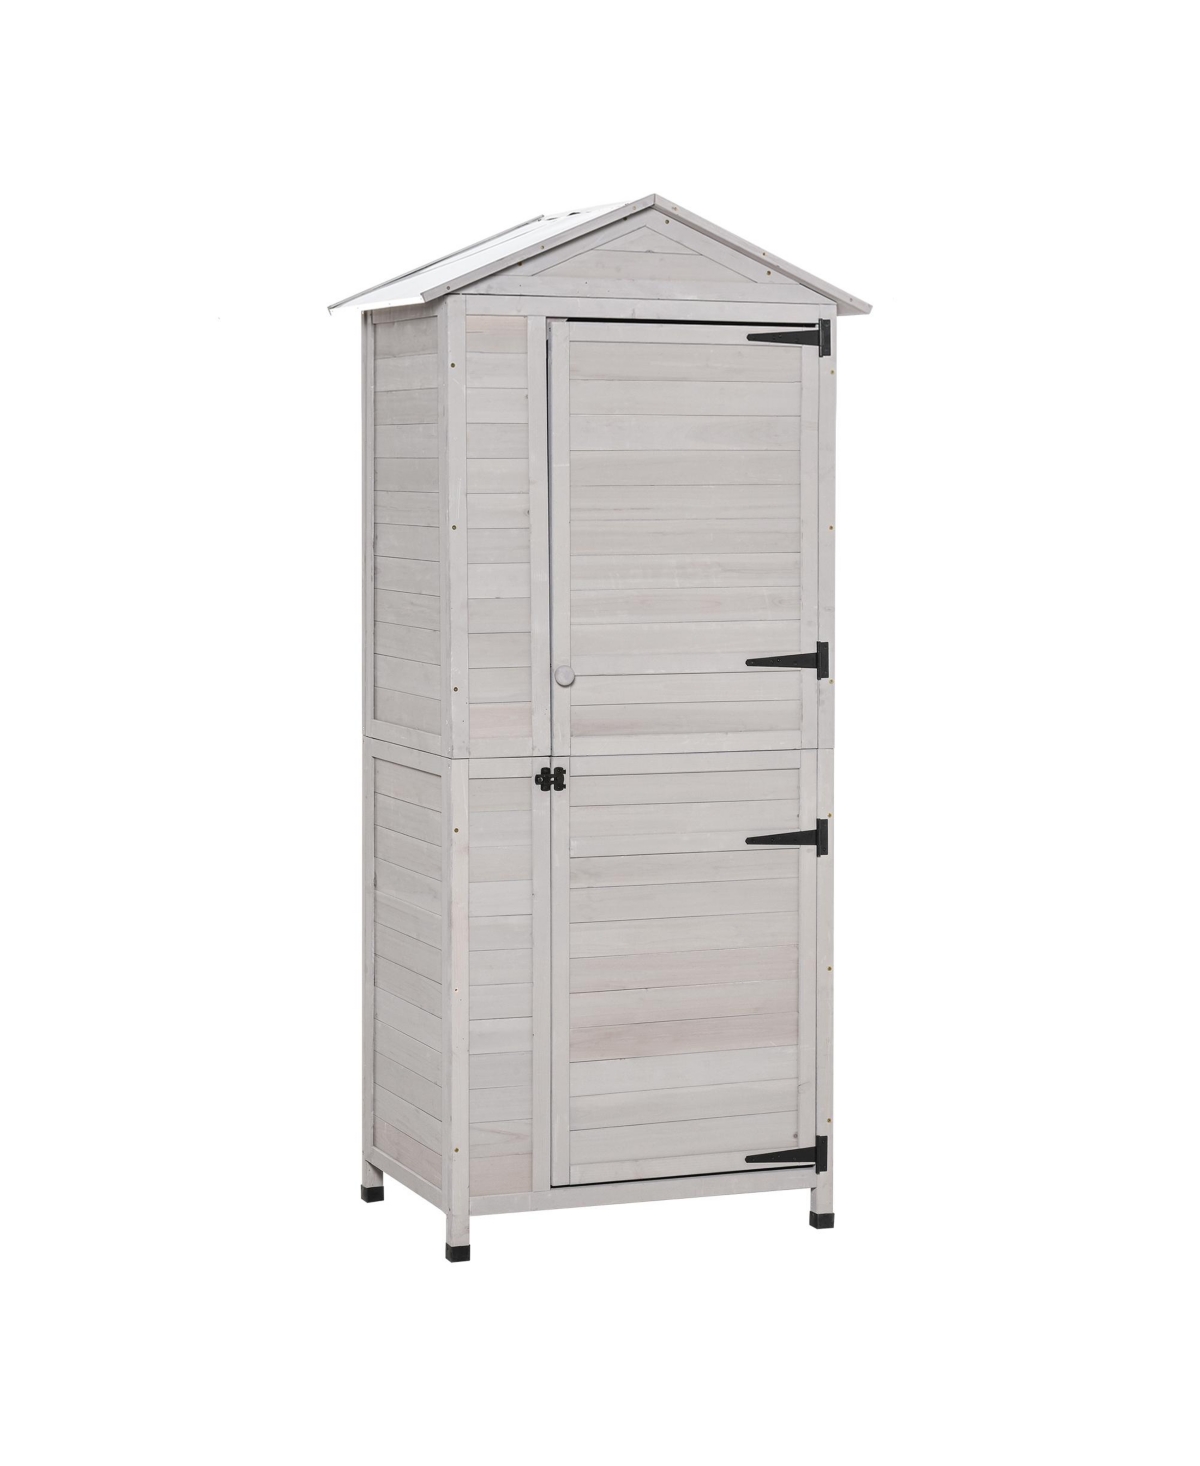 36" x 25" x 79" Wooden Storage Shed Cabinet, Outdoor Tool Shed Organizer with 4-Tier, 3 Shelves with Handle Tin Roof Magnetic Latch Foot Pad,